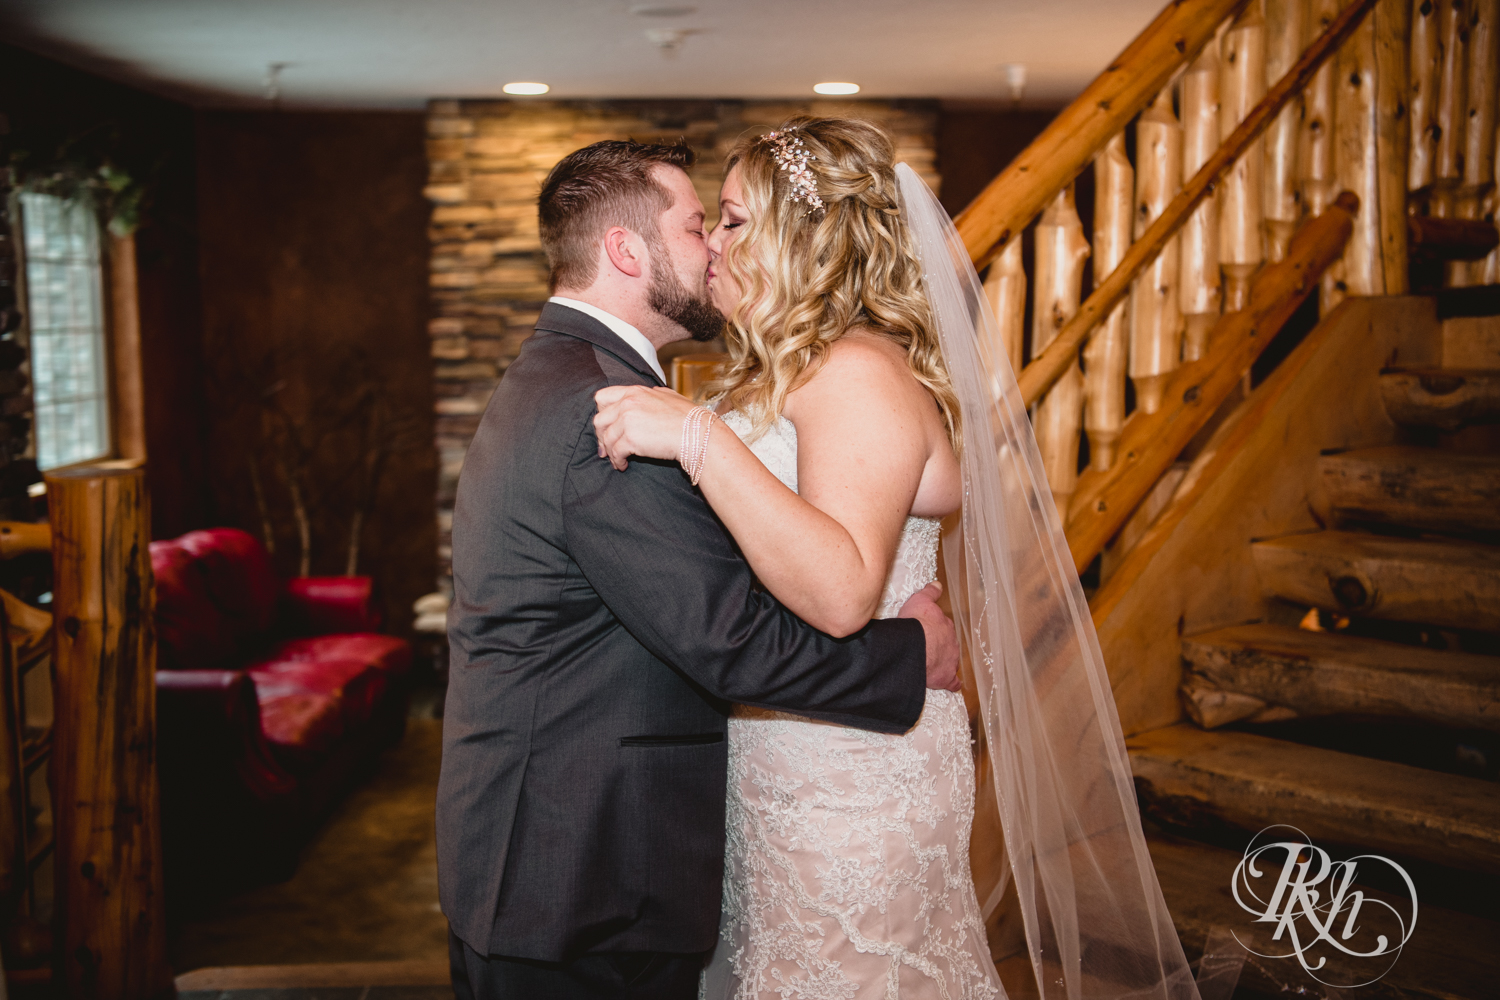 Bride and groom kiss each other at first look at Whitefish Lodge in Crosslake, Minnesota.